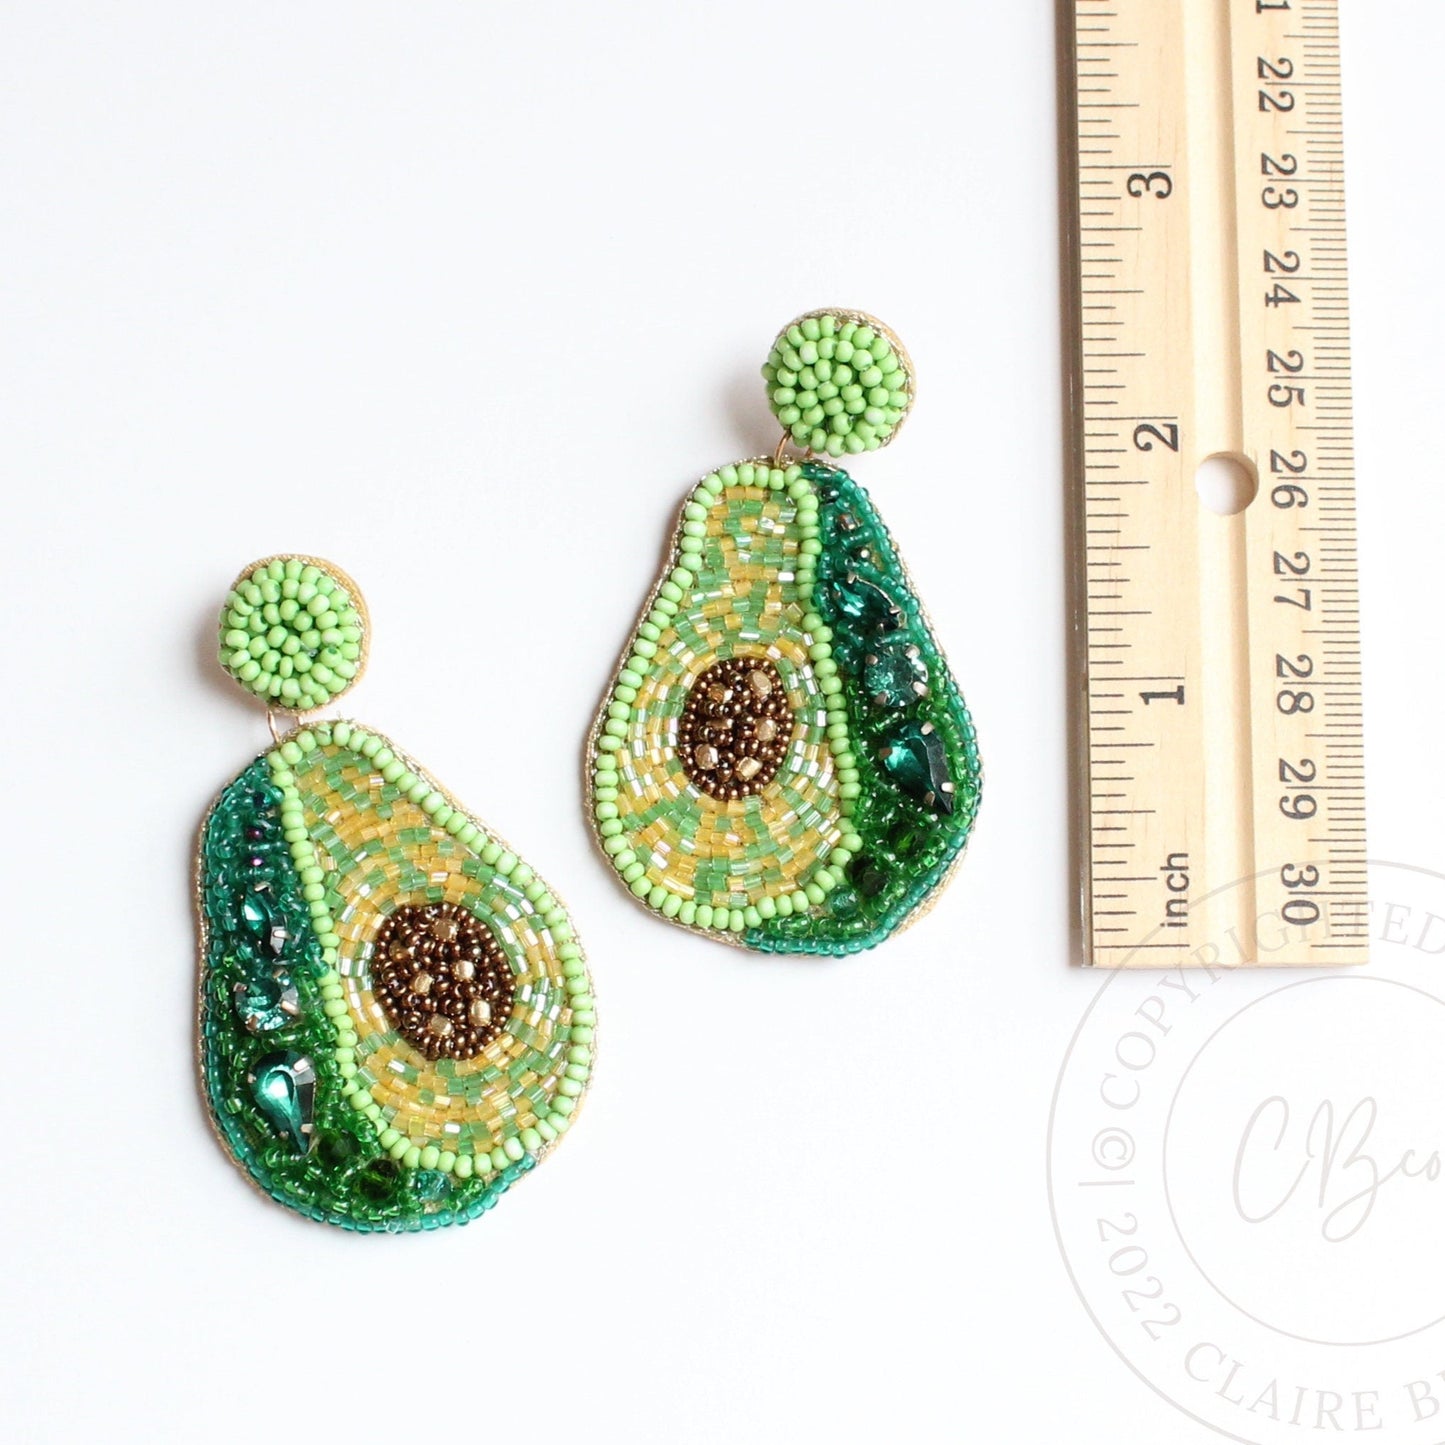 avocado beaded earrings on flat surface next to ruler showing they are approximately 2.5 inches long